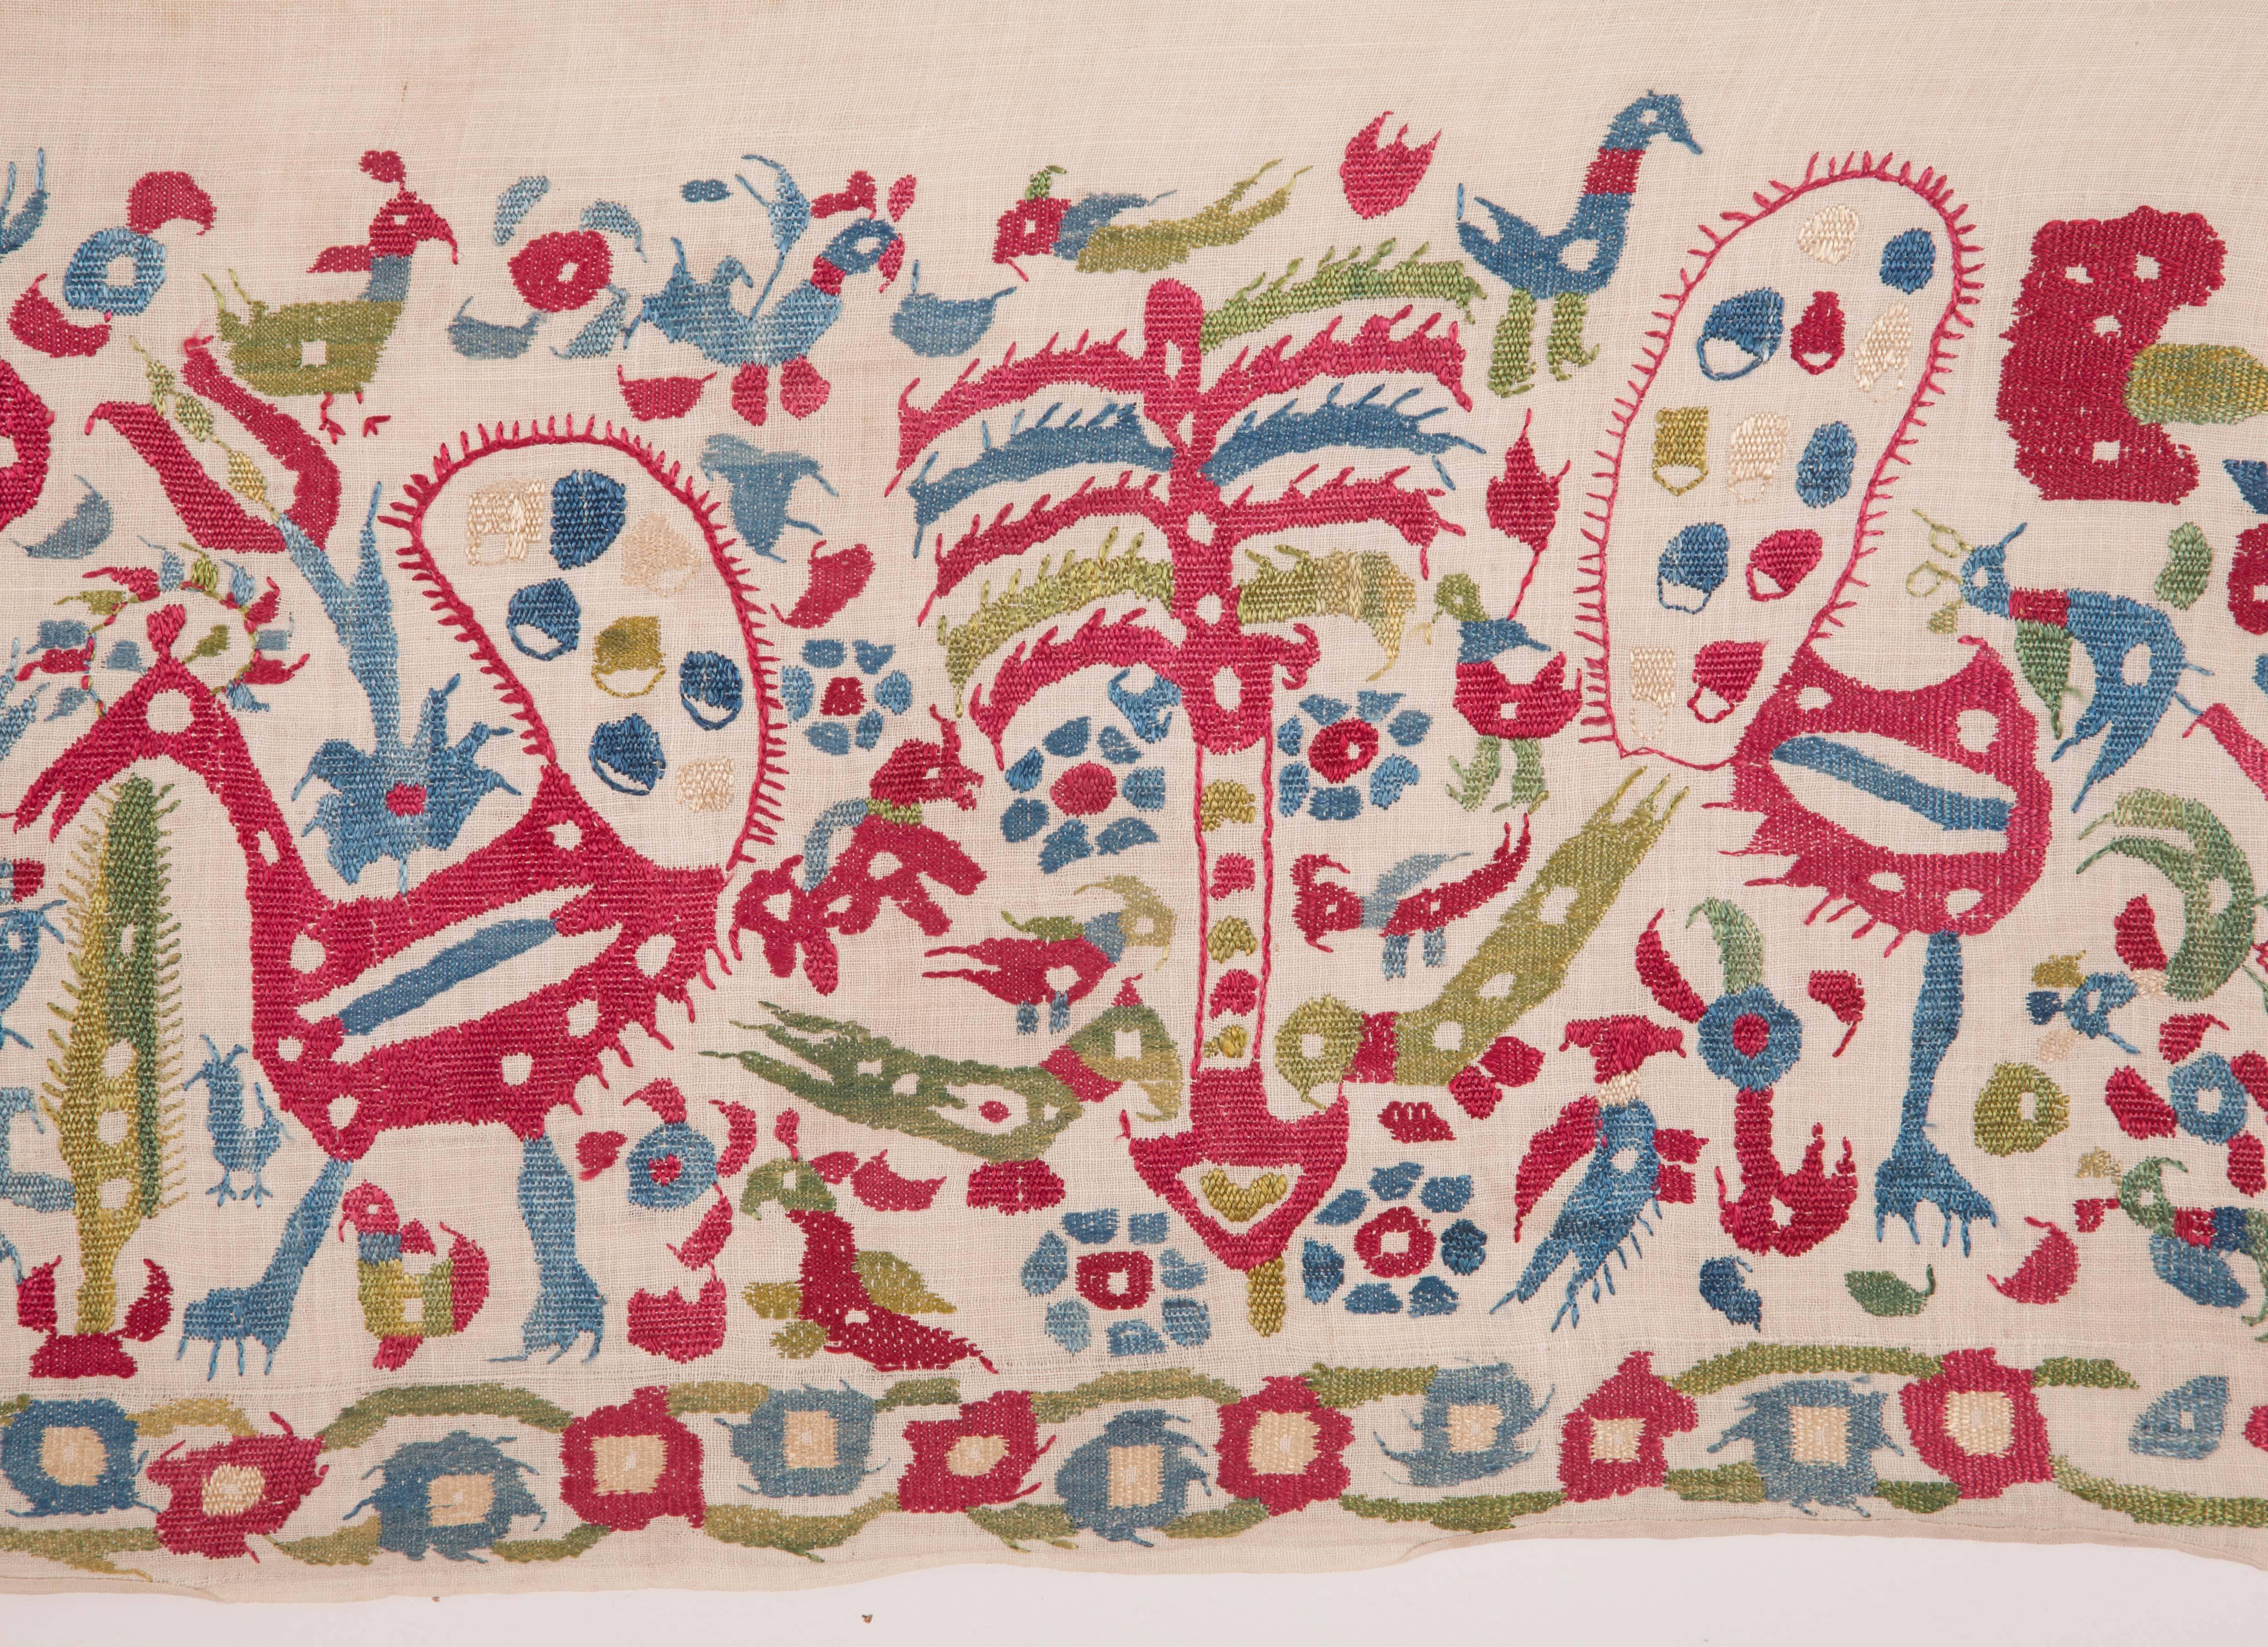 Gibraltarian 18th Century Embroidered Fragment from Epirus, Greece